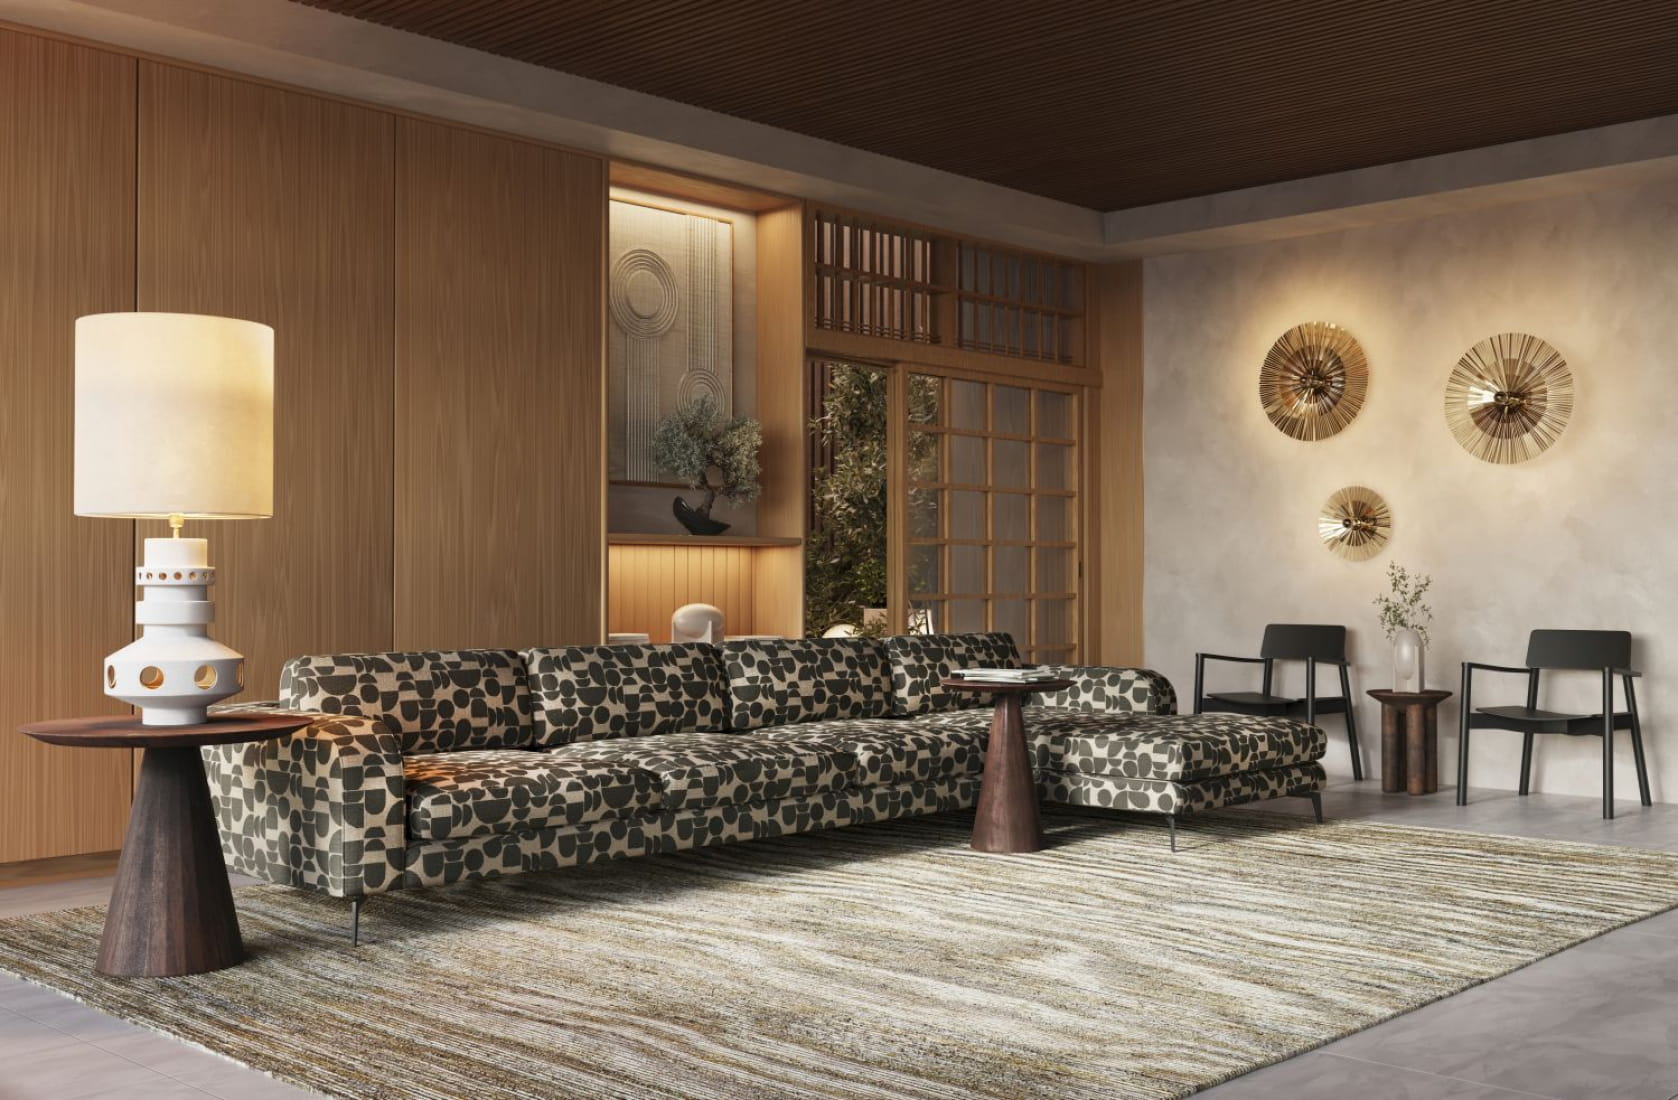 3d-interior-showcase-for-furniture-brand-by-pixready